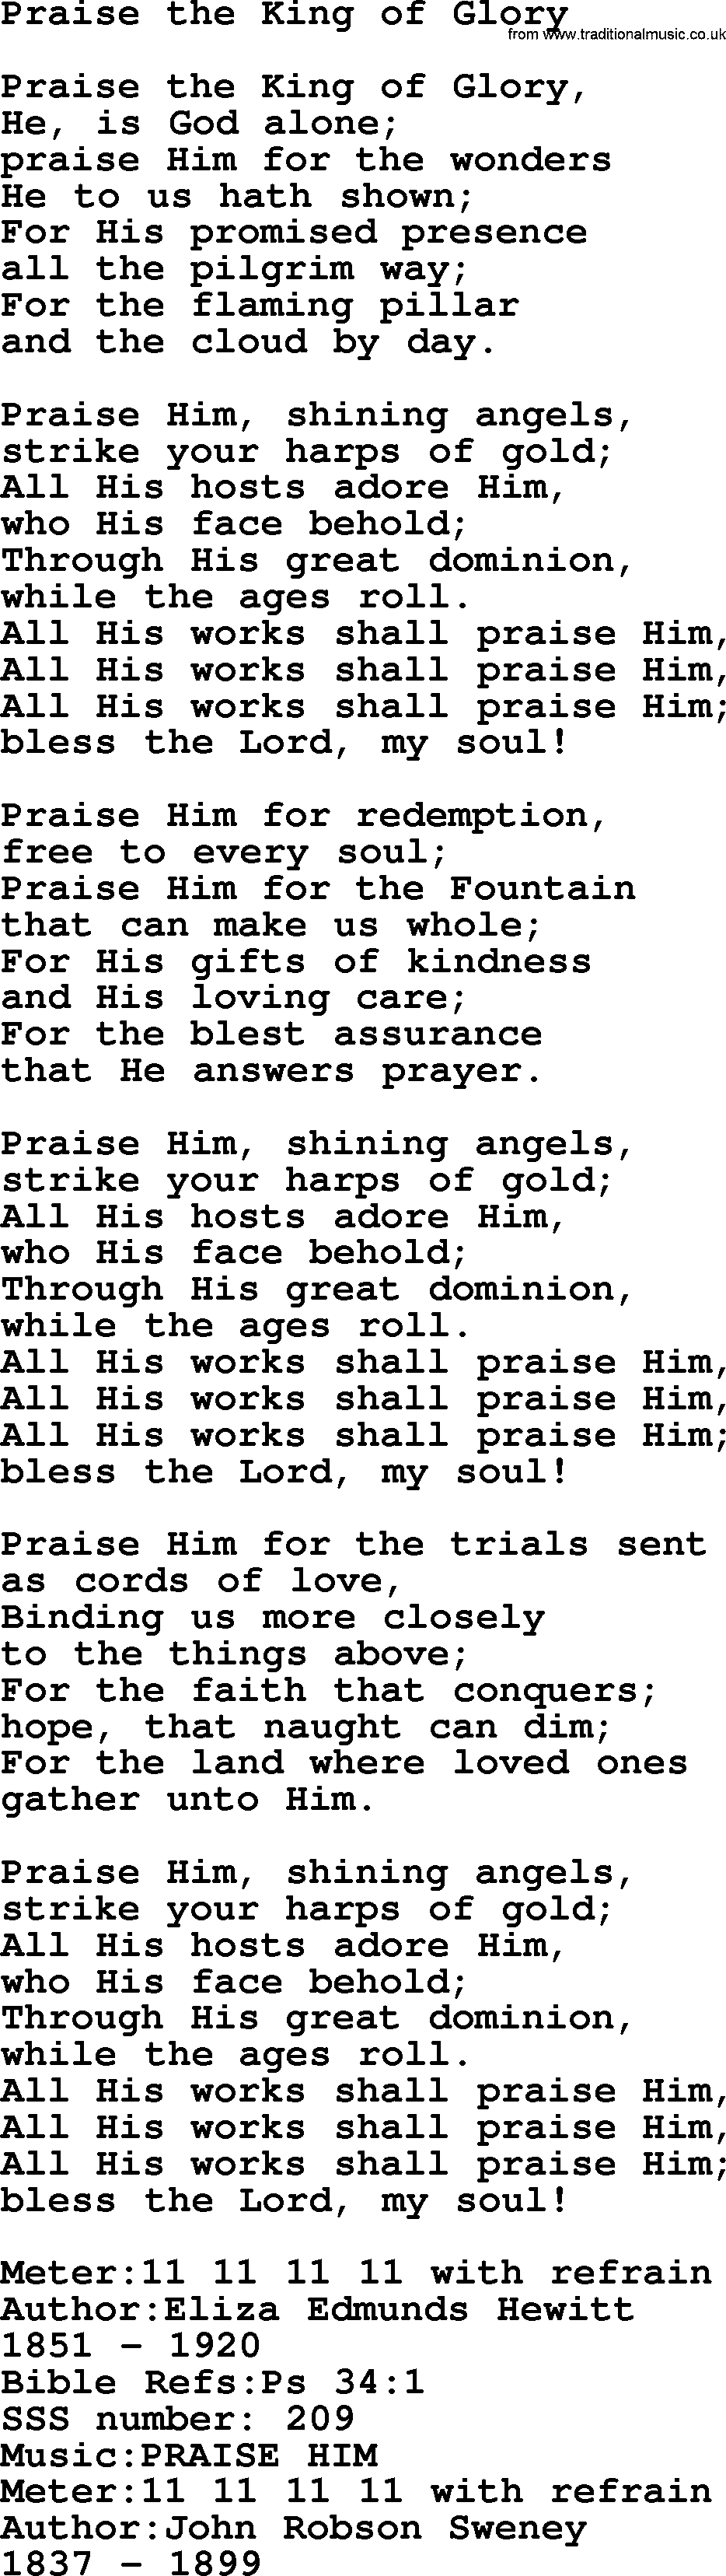 Sacred Songs and Solos complete, 1200 Hymns, title: Praise The King Of Glory, lyrics and PDF